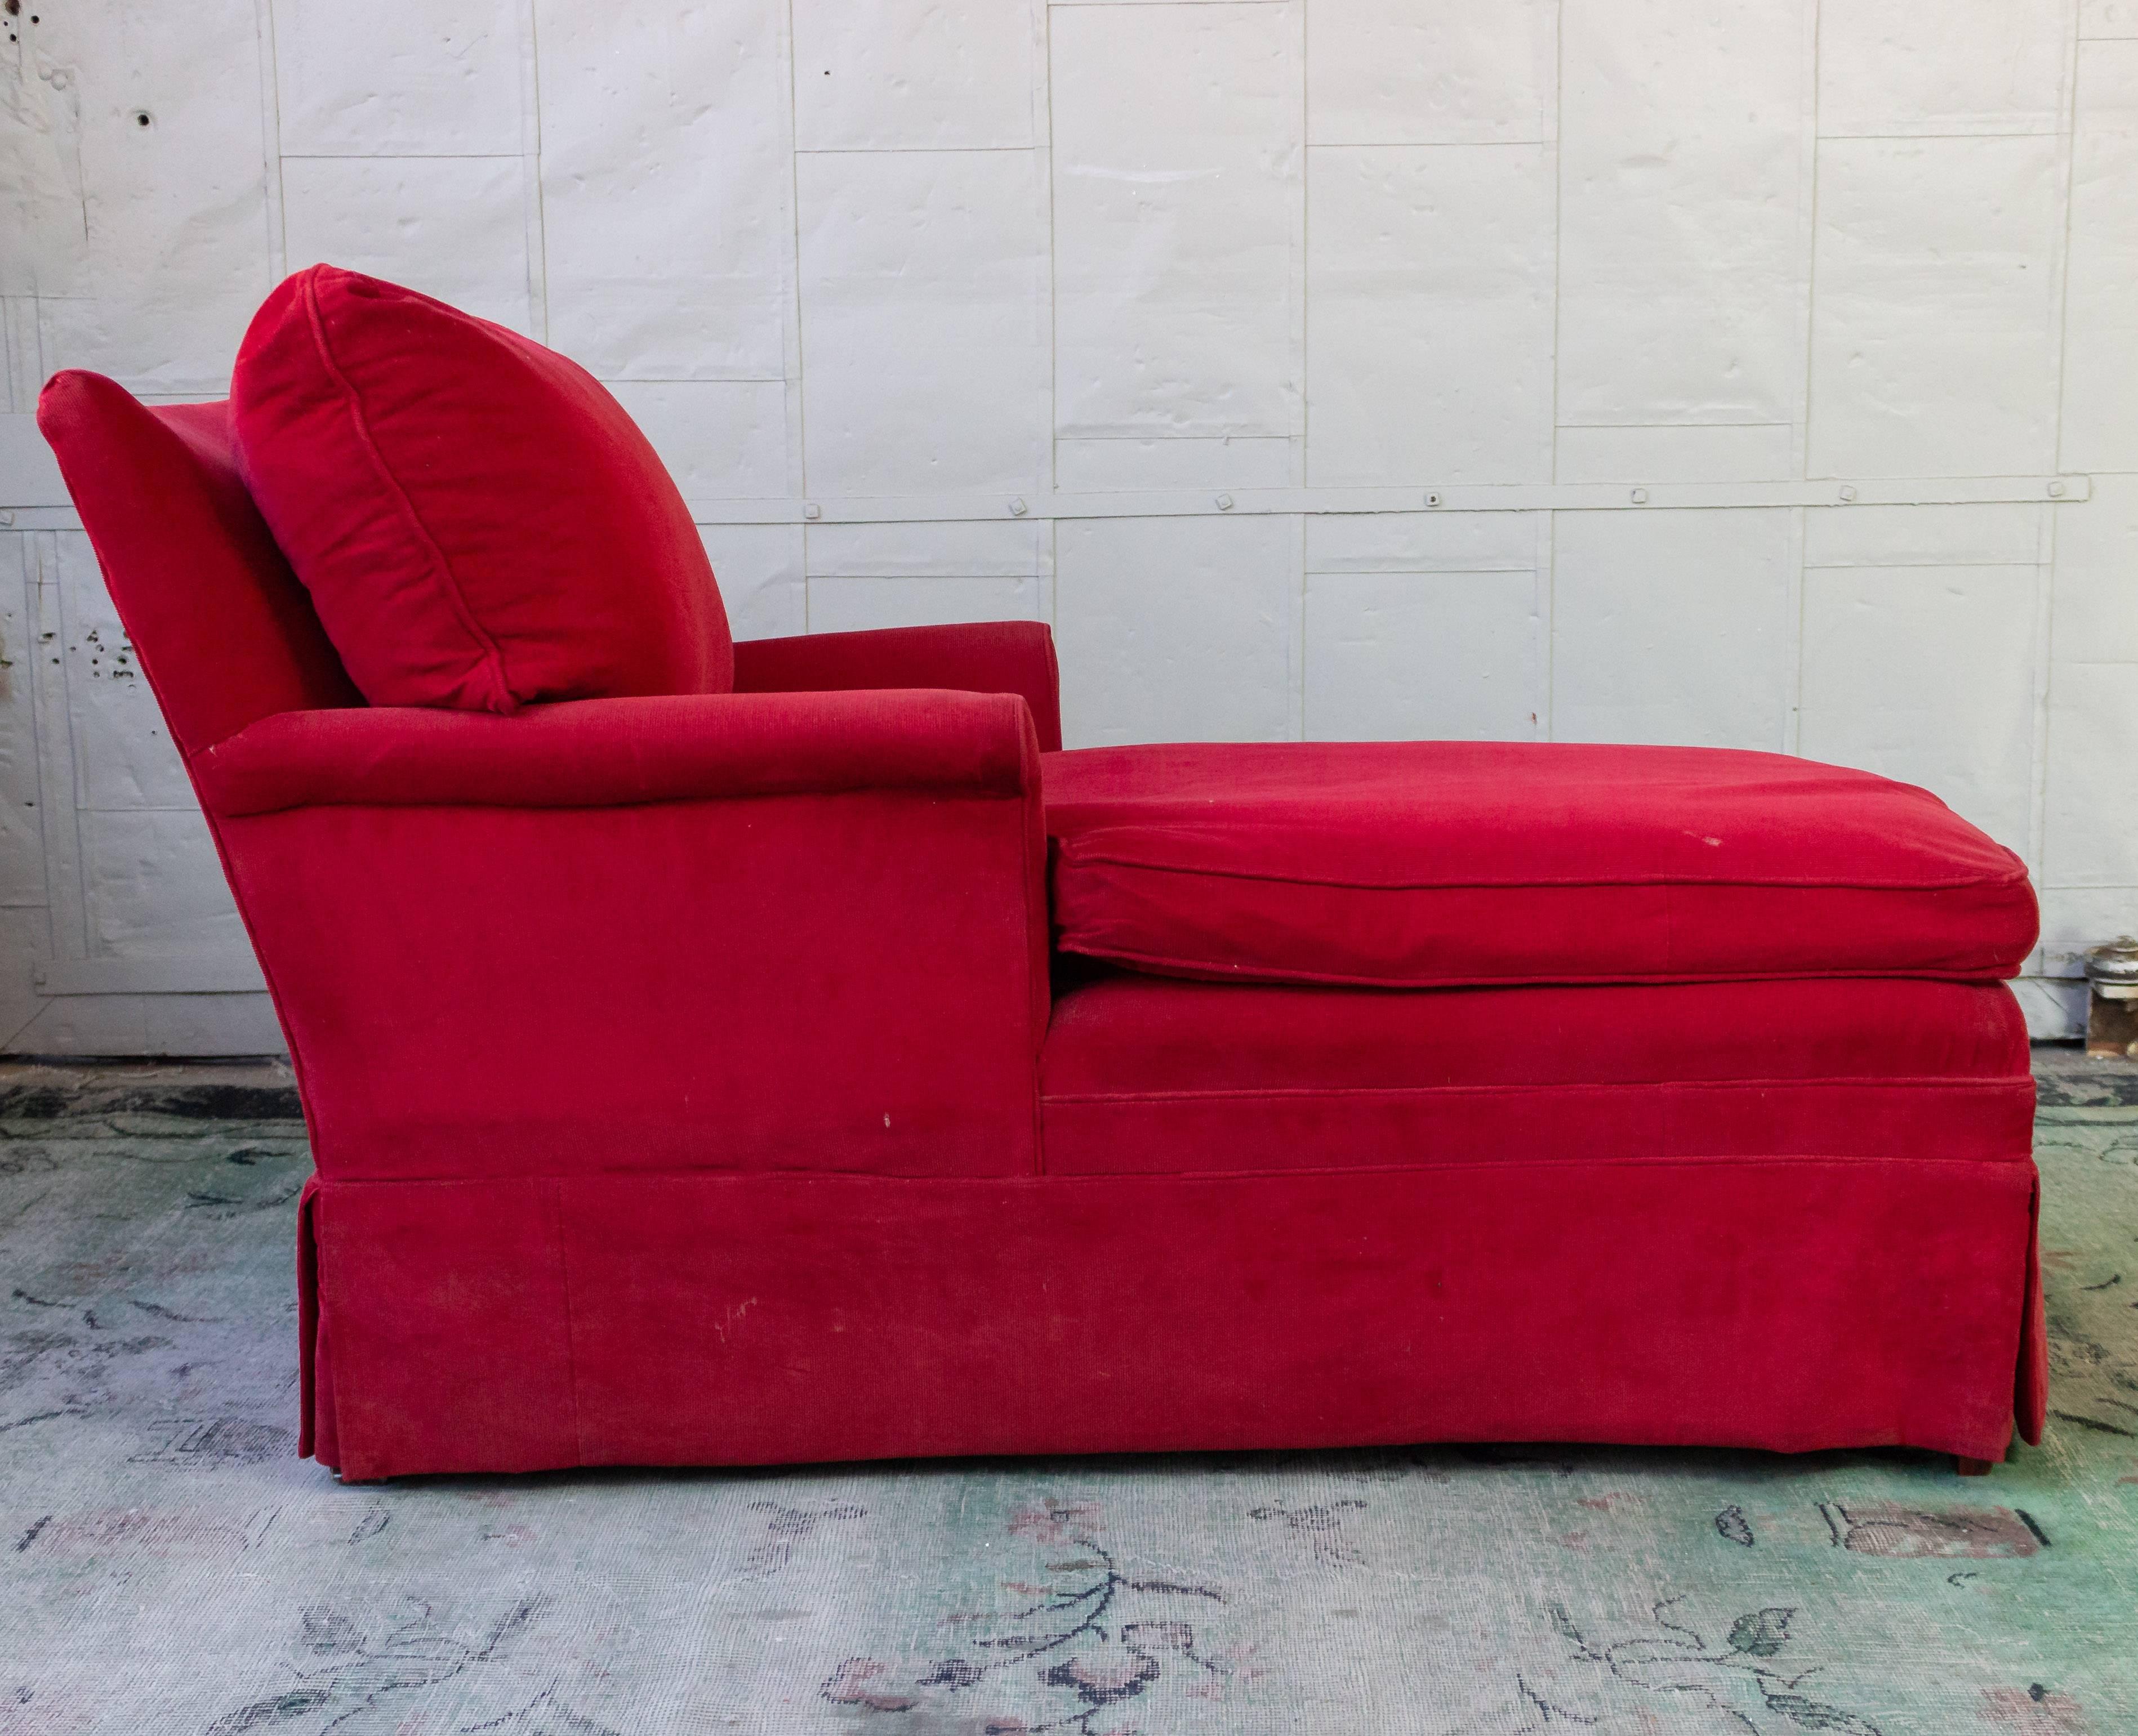 Small Ladie's Chaise Longue 5